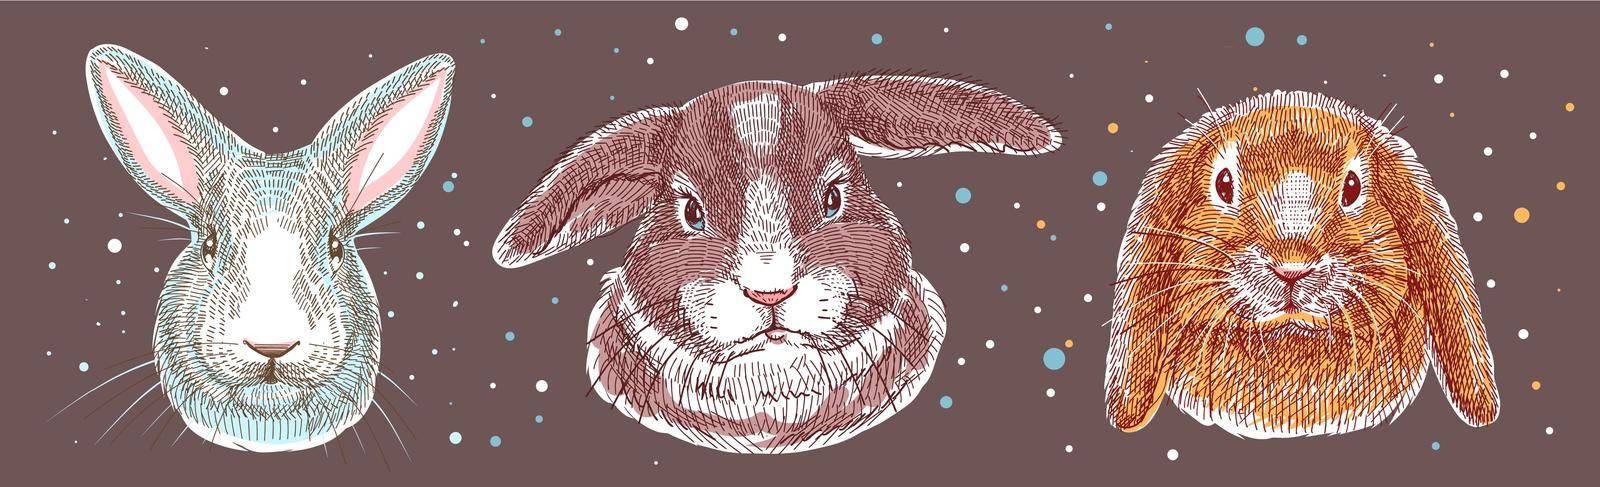 Color illustration, sketch drawn with markers. Set of domestic rabbits, portraits of heads. All elements of the illustration are isolated, it is easy to change colors and backgrounds. by Manka